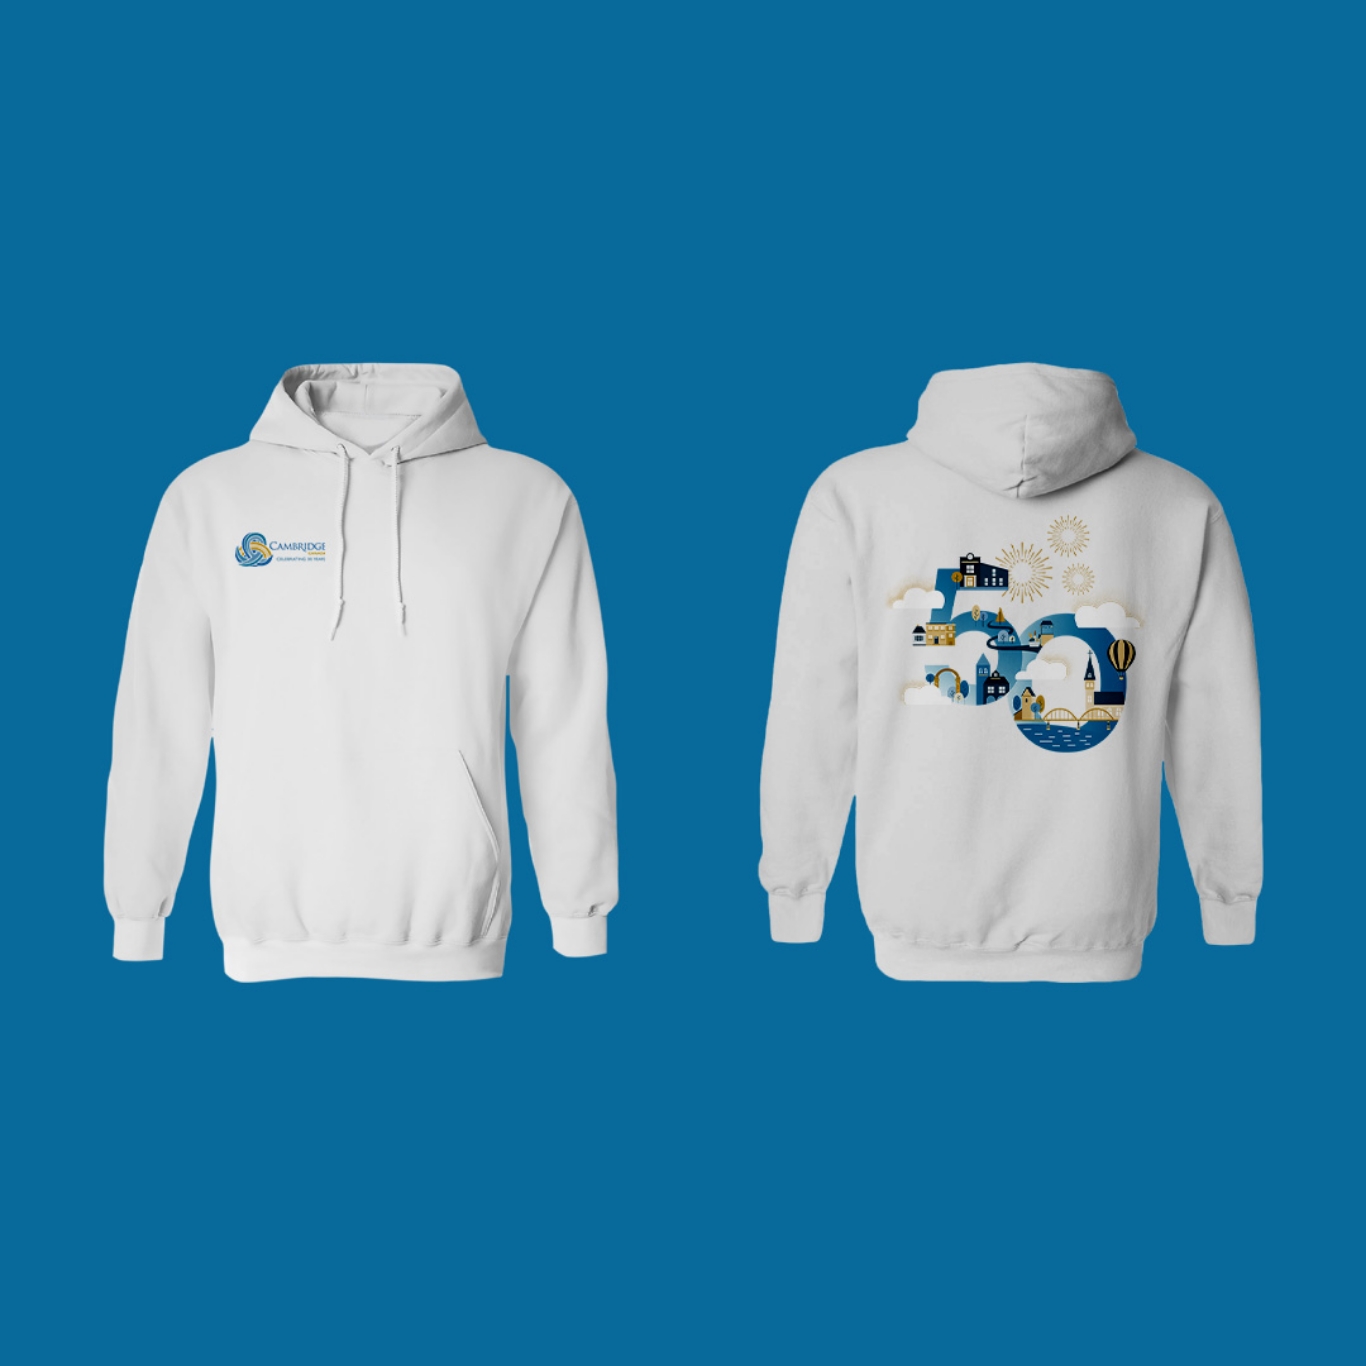 Hoodie mock up with anniversary logo